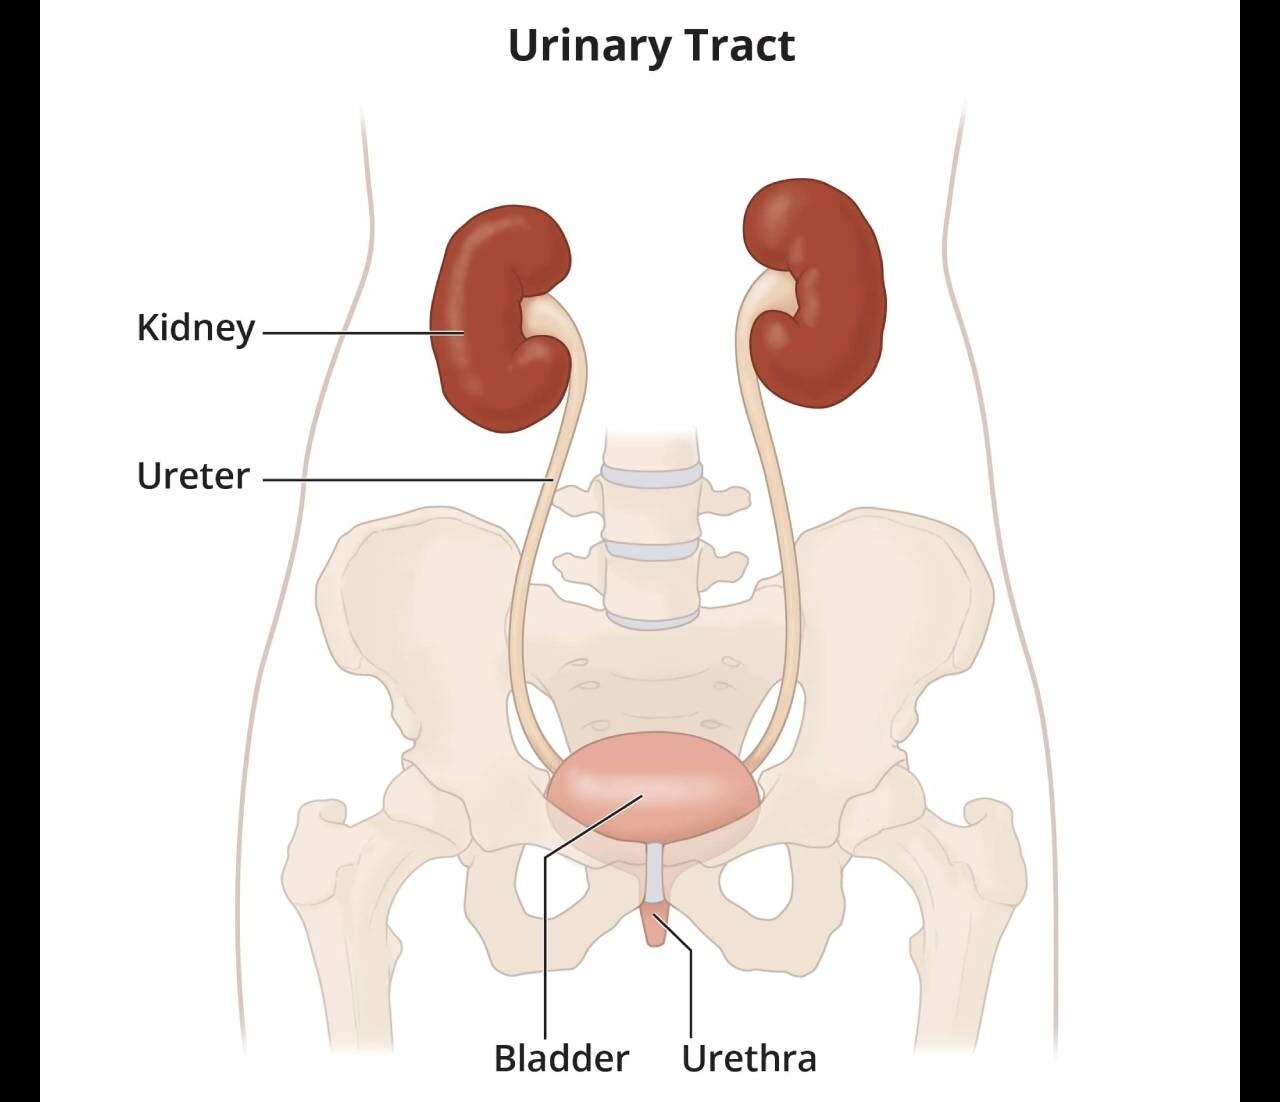  The urinary tract, showing the kidneys, ureters, bladder, and urethra.